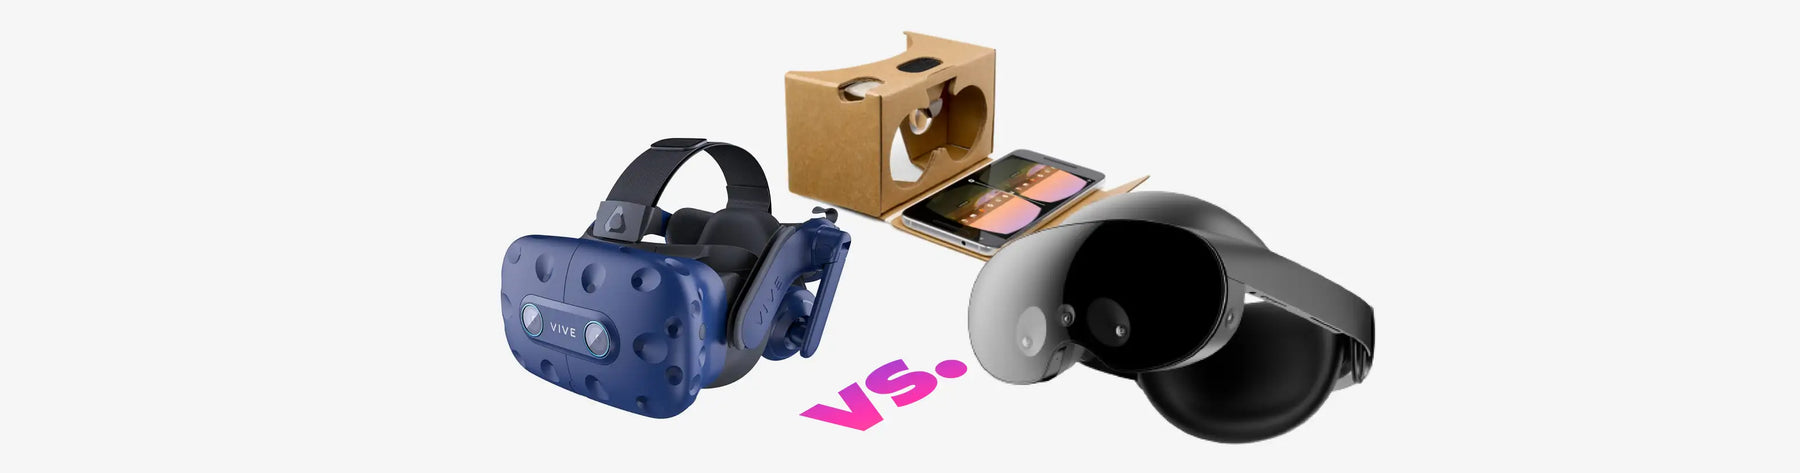 PCVR, Standalone, Mobile: VR Headset Buying Guide